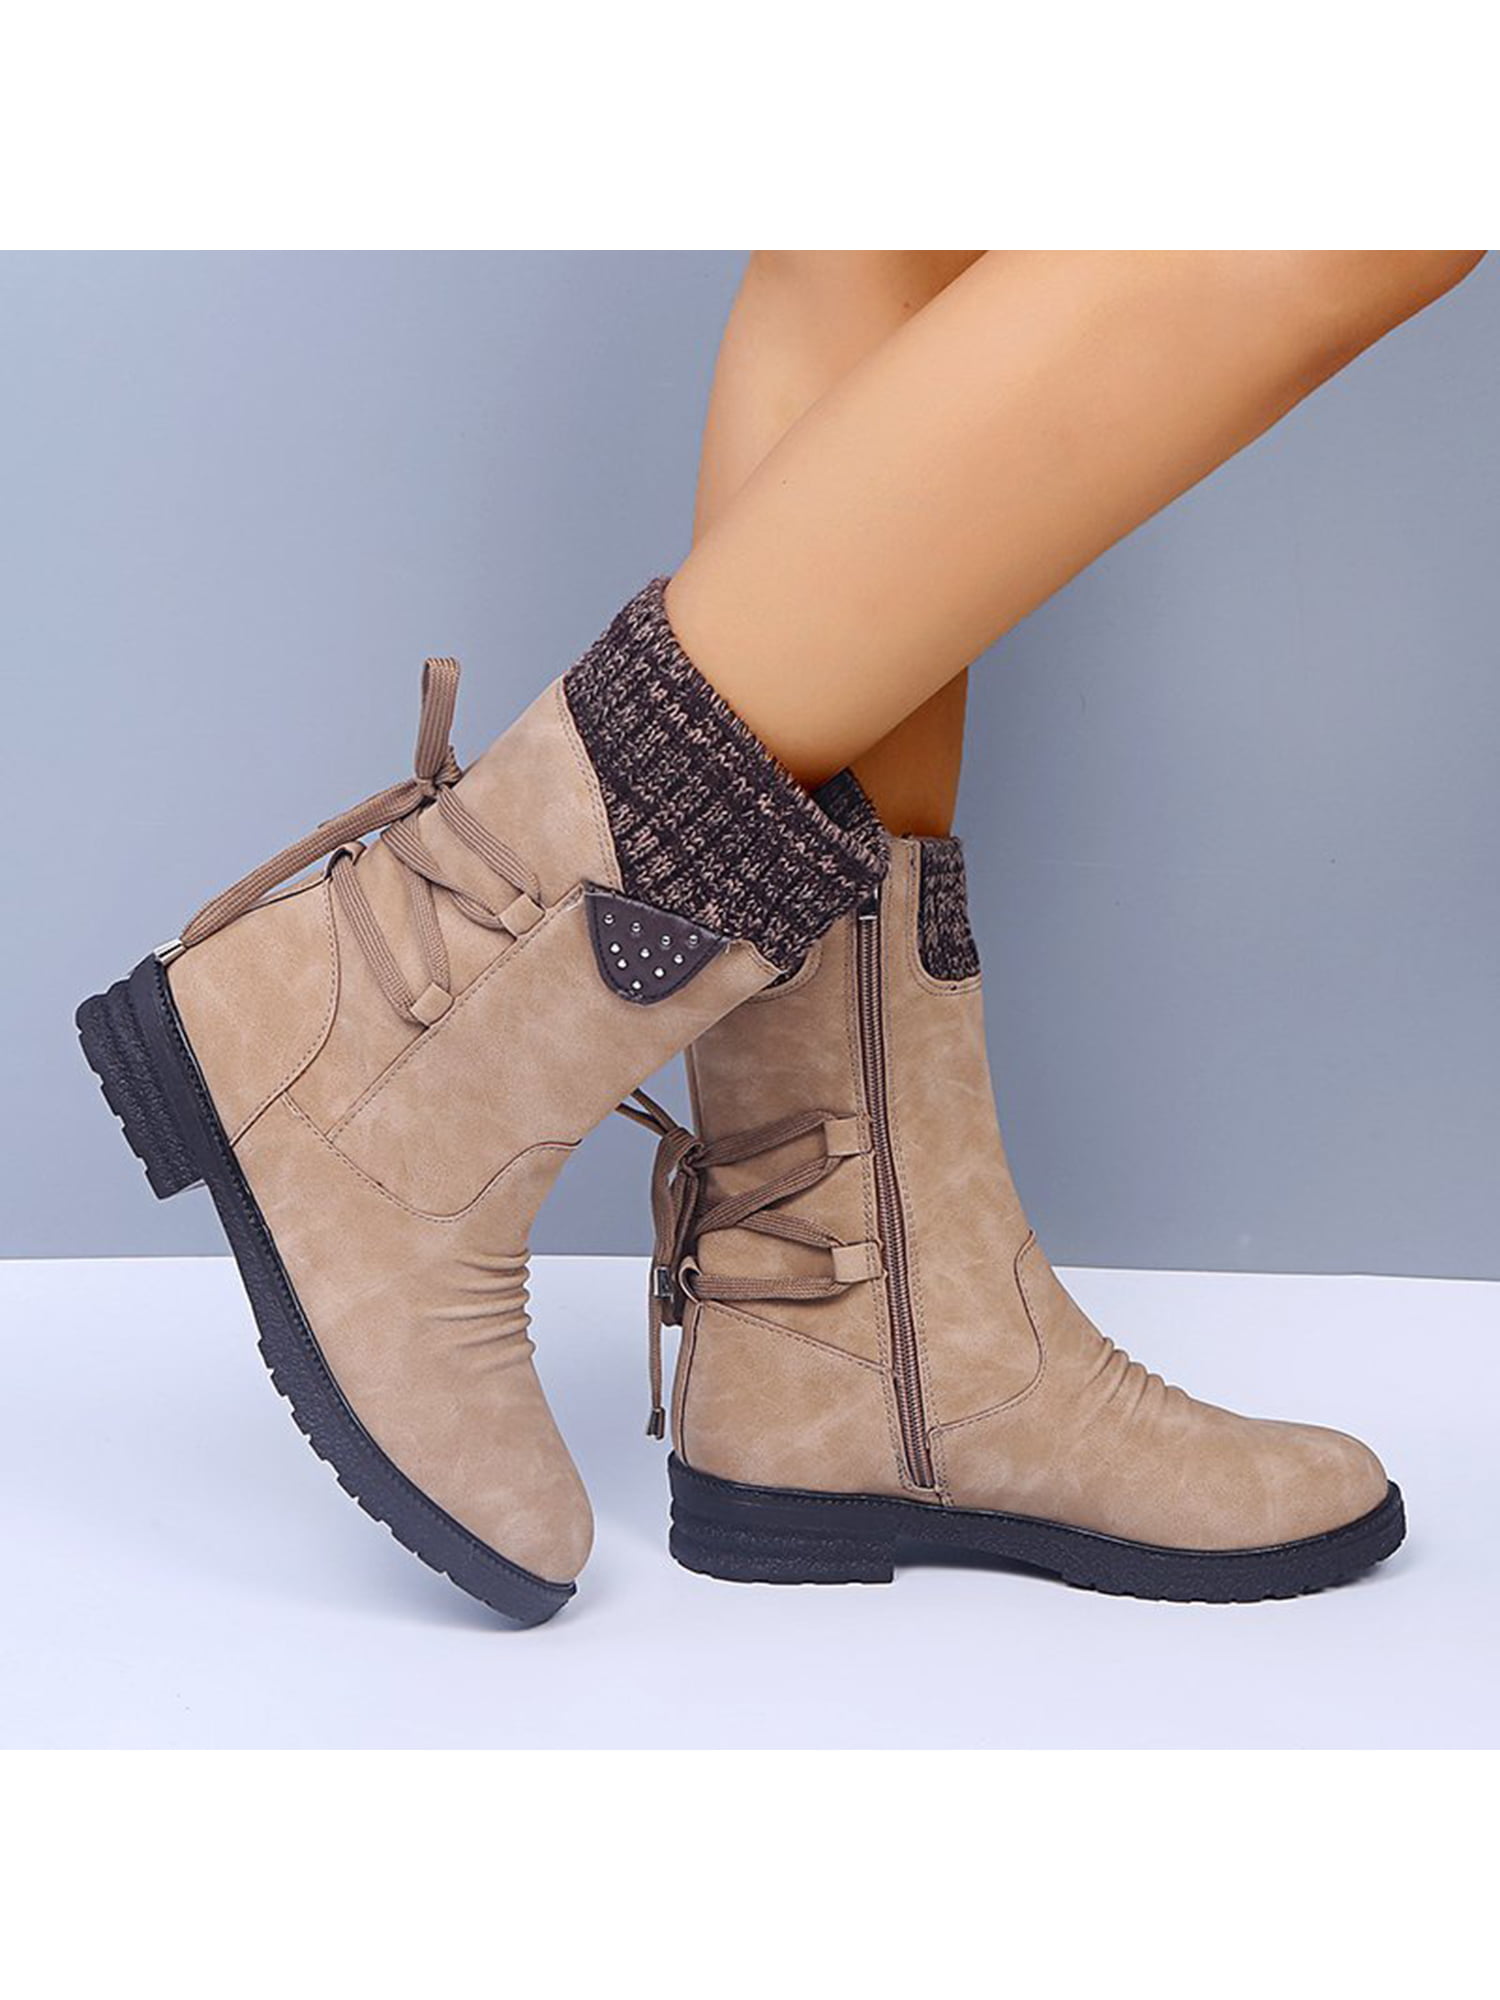 35EU-40EU Snow Boots Boots Spring and Autumn Winter Students Plus Velvet Strap Retro Flat Boots Ladies Outdoor Sports Shoes LXIANGP Womens Boots